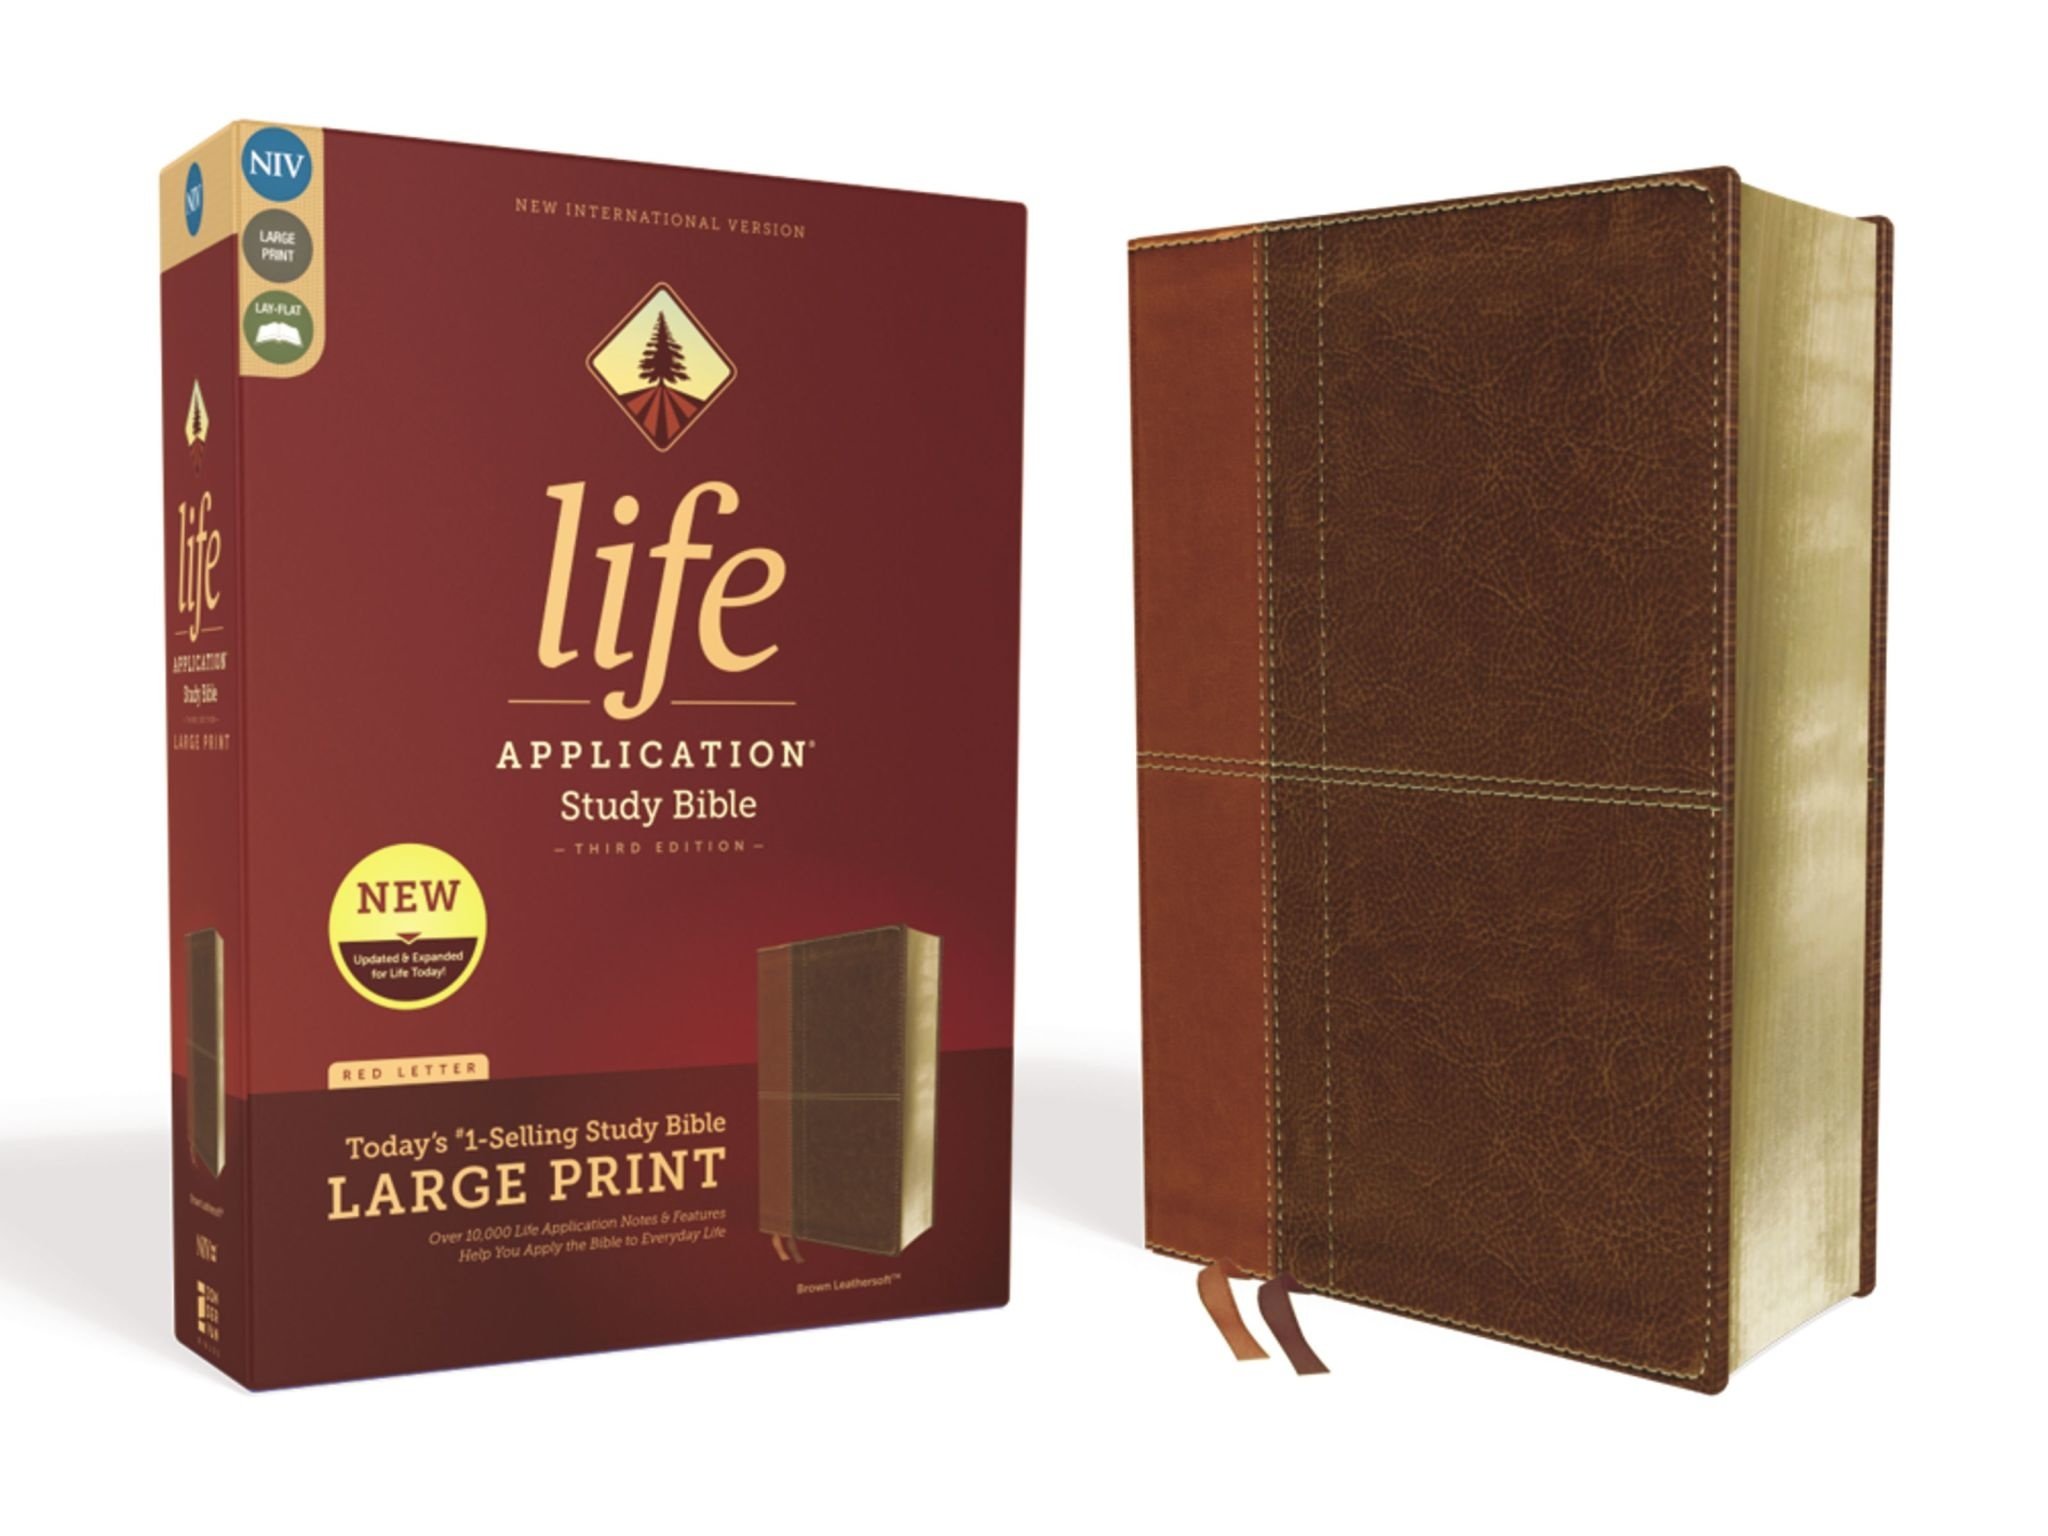 NIV Life Application Study Bible, Third Edition, Large Print, Leathersoft, Brown